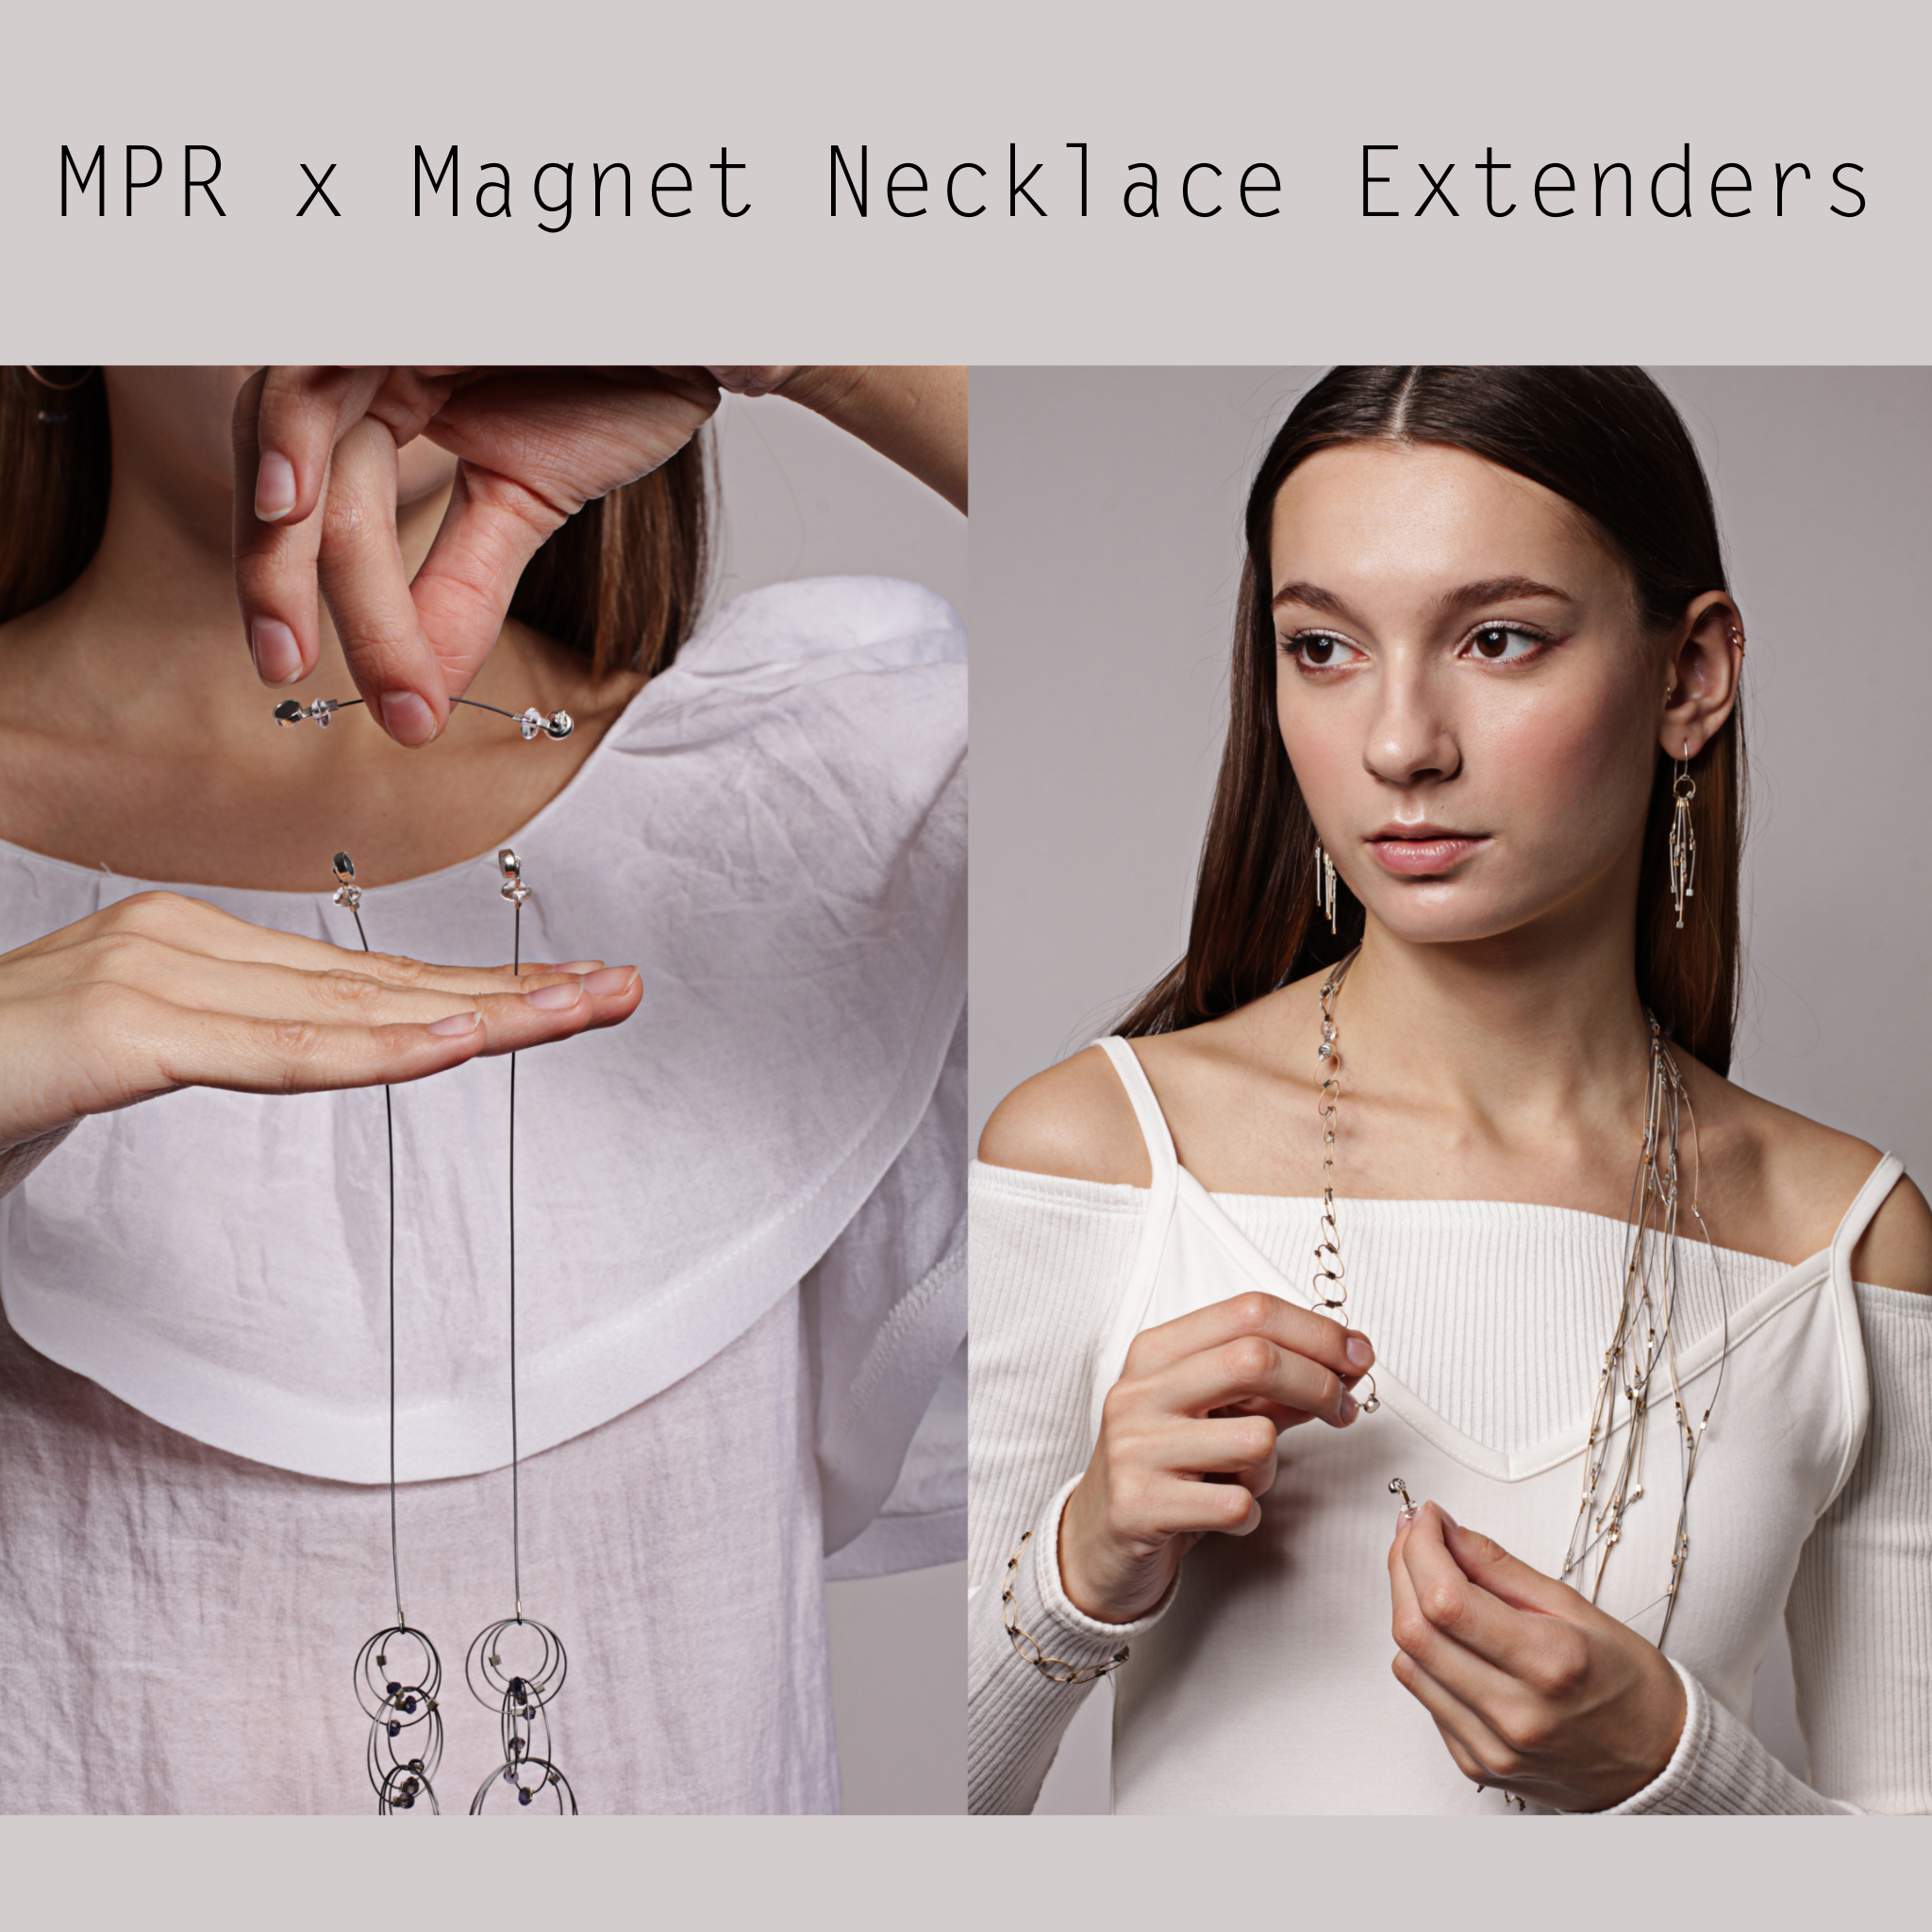 MPR x Magnet Necklace Extenders – Meghan Patrice Riley